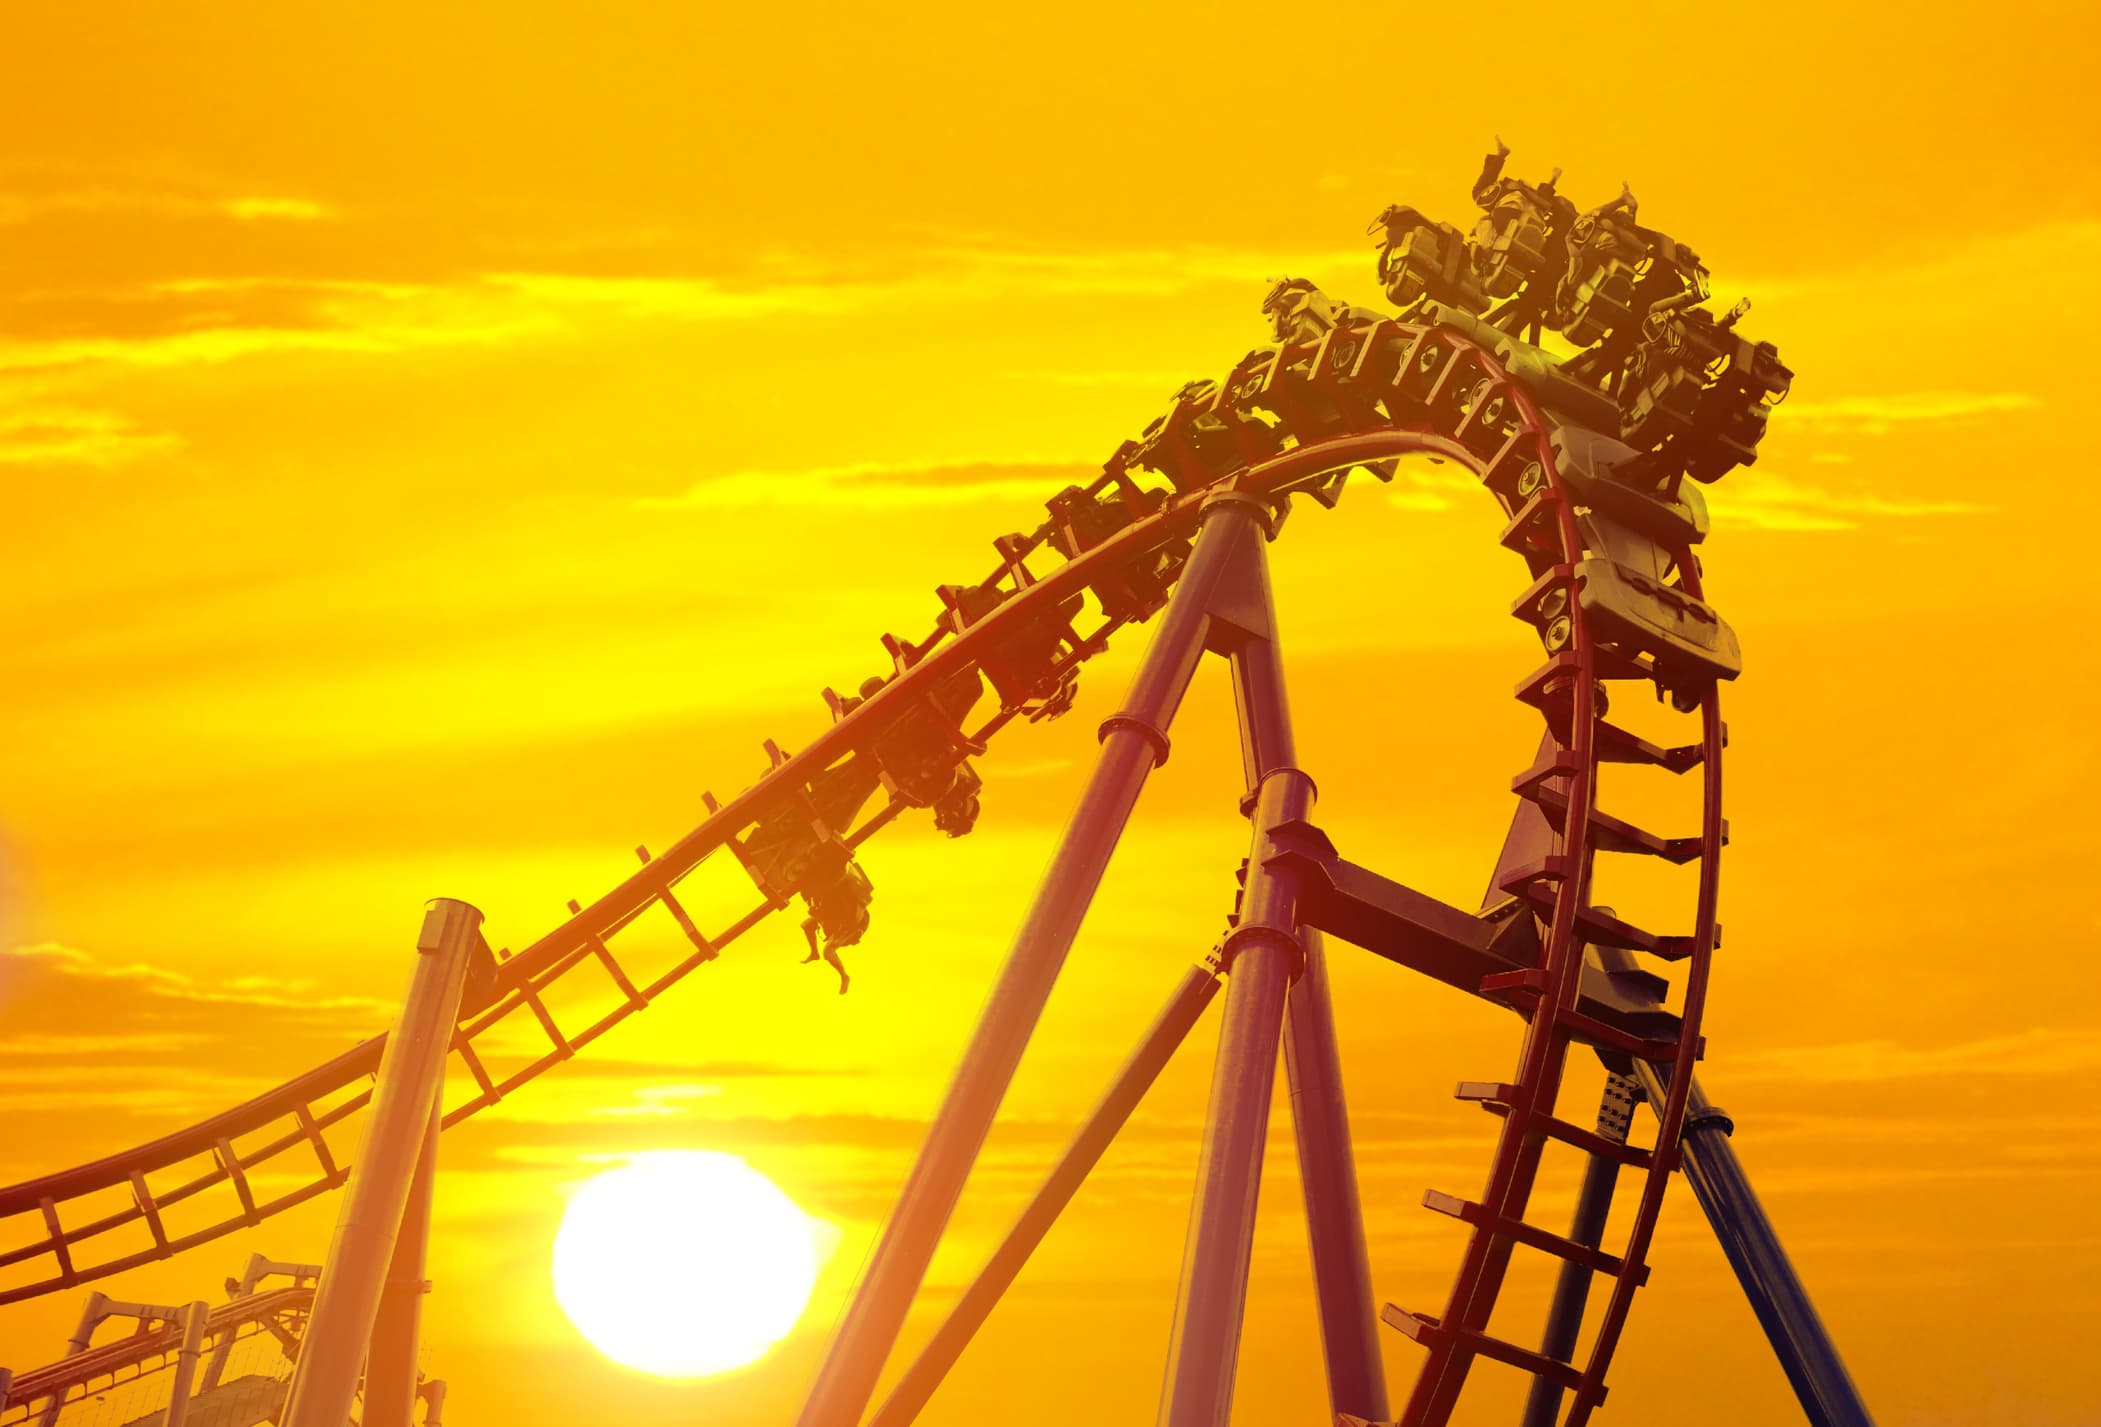 Roller coaster in the amusement park with the sunset background.